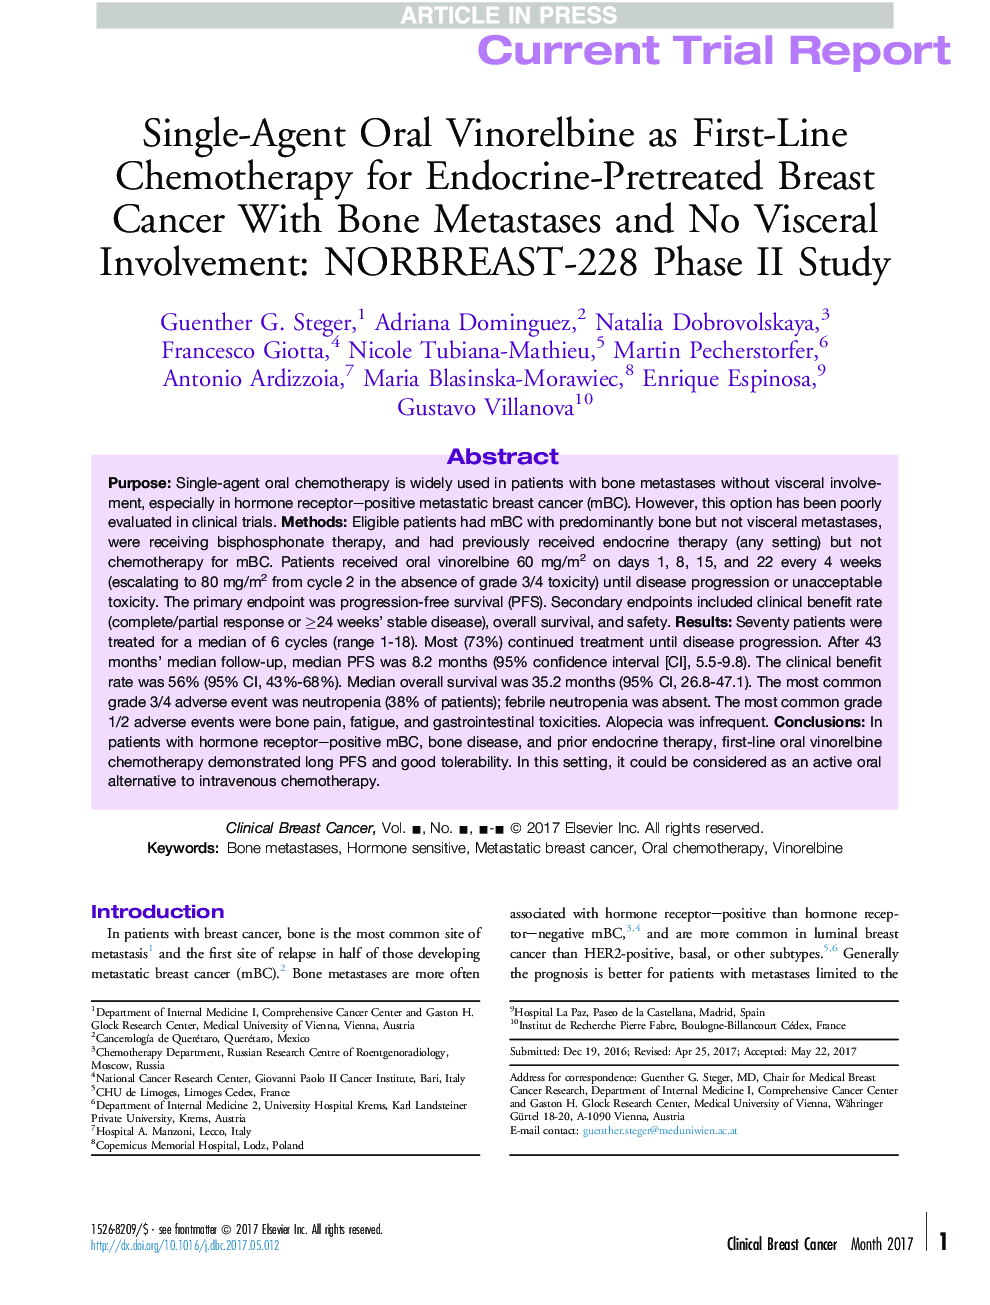 Single-Agent Oral Vinorelbine as First-Line Chemotherapy for Endocrine-Pretreated Breast Cancer With Bone Metastases and No Visceral Involvement: NORBREAST-228 Phase II Study